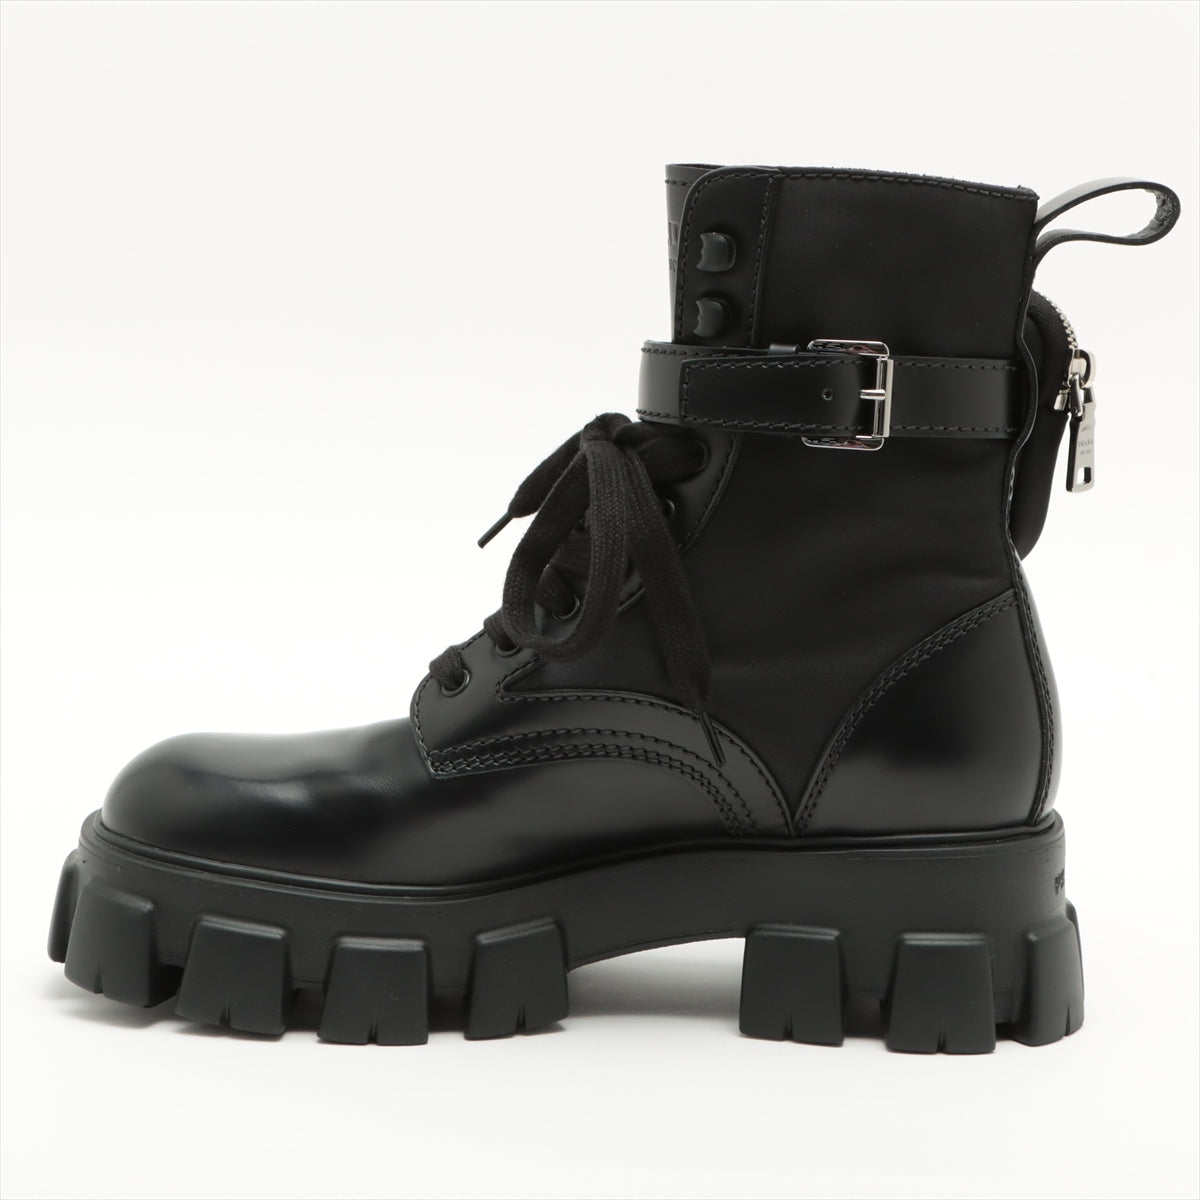 Prada Monolith Nylon & leather Boots 7 1/2 Men's Black 2UE007 box There is a bag Pouch Triangle logo